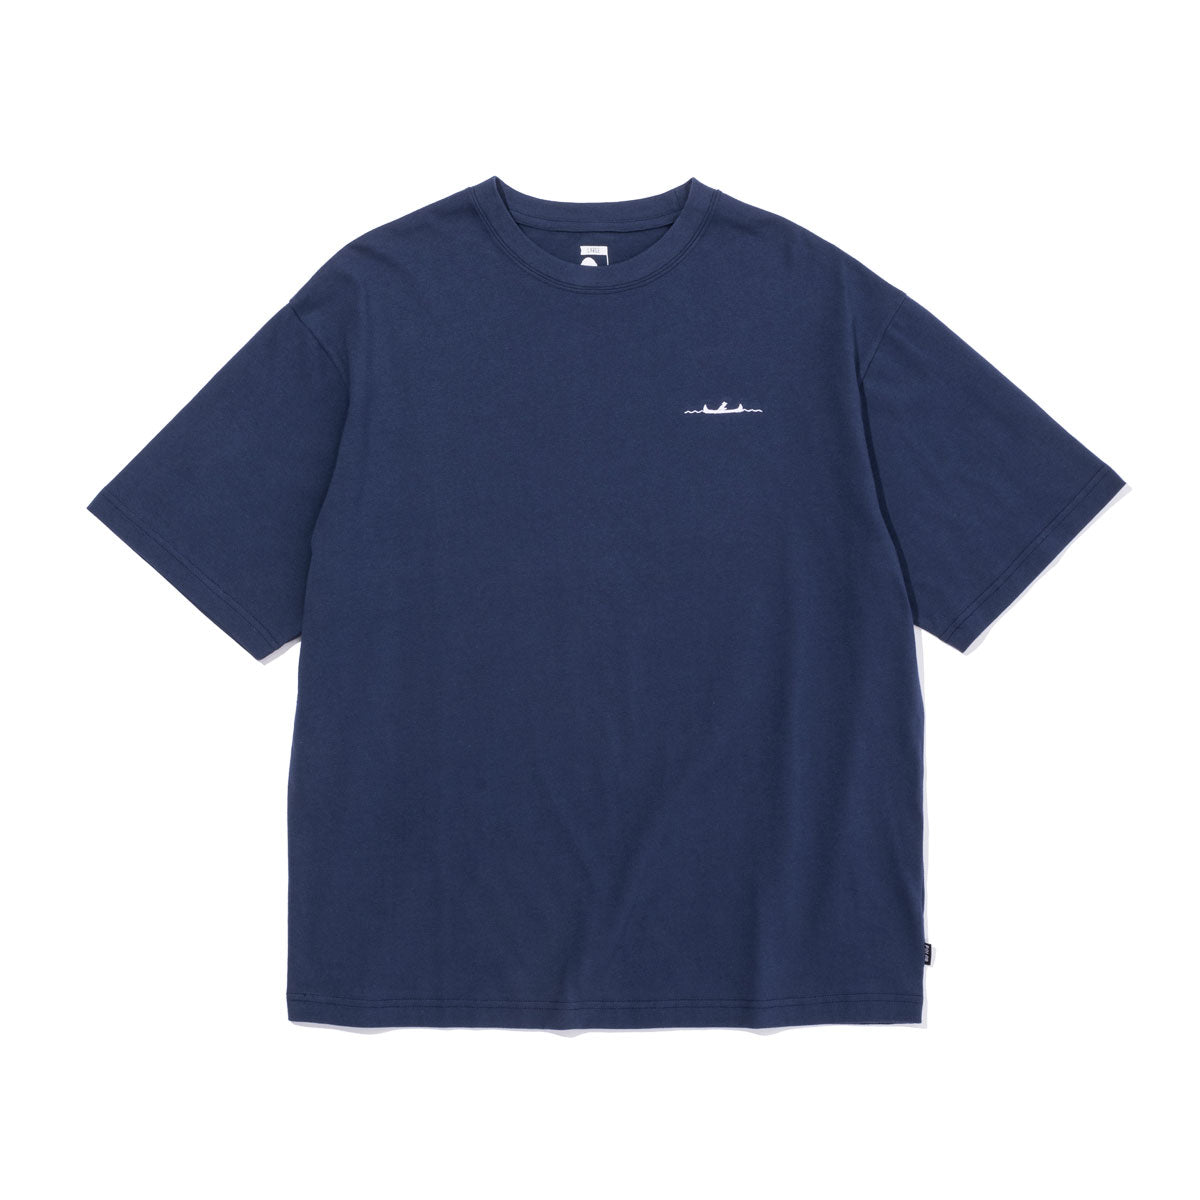 LABEL RELAX FIT TEE